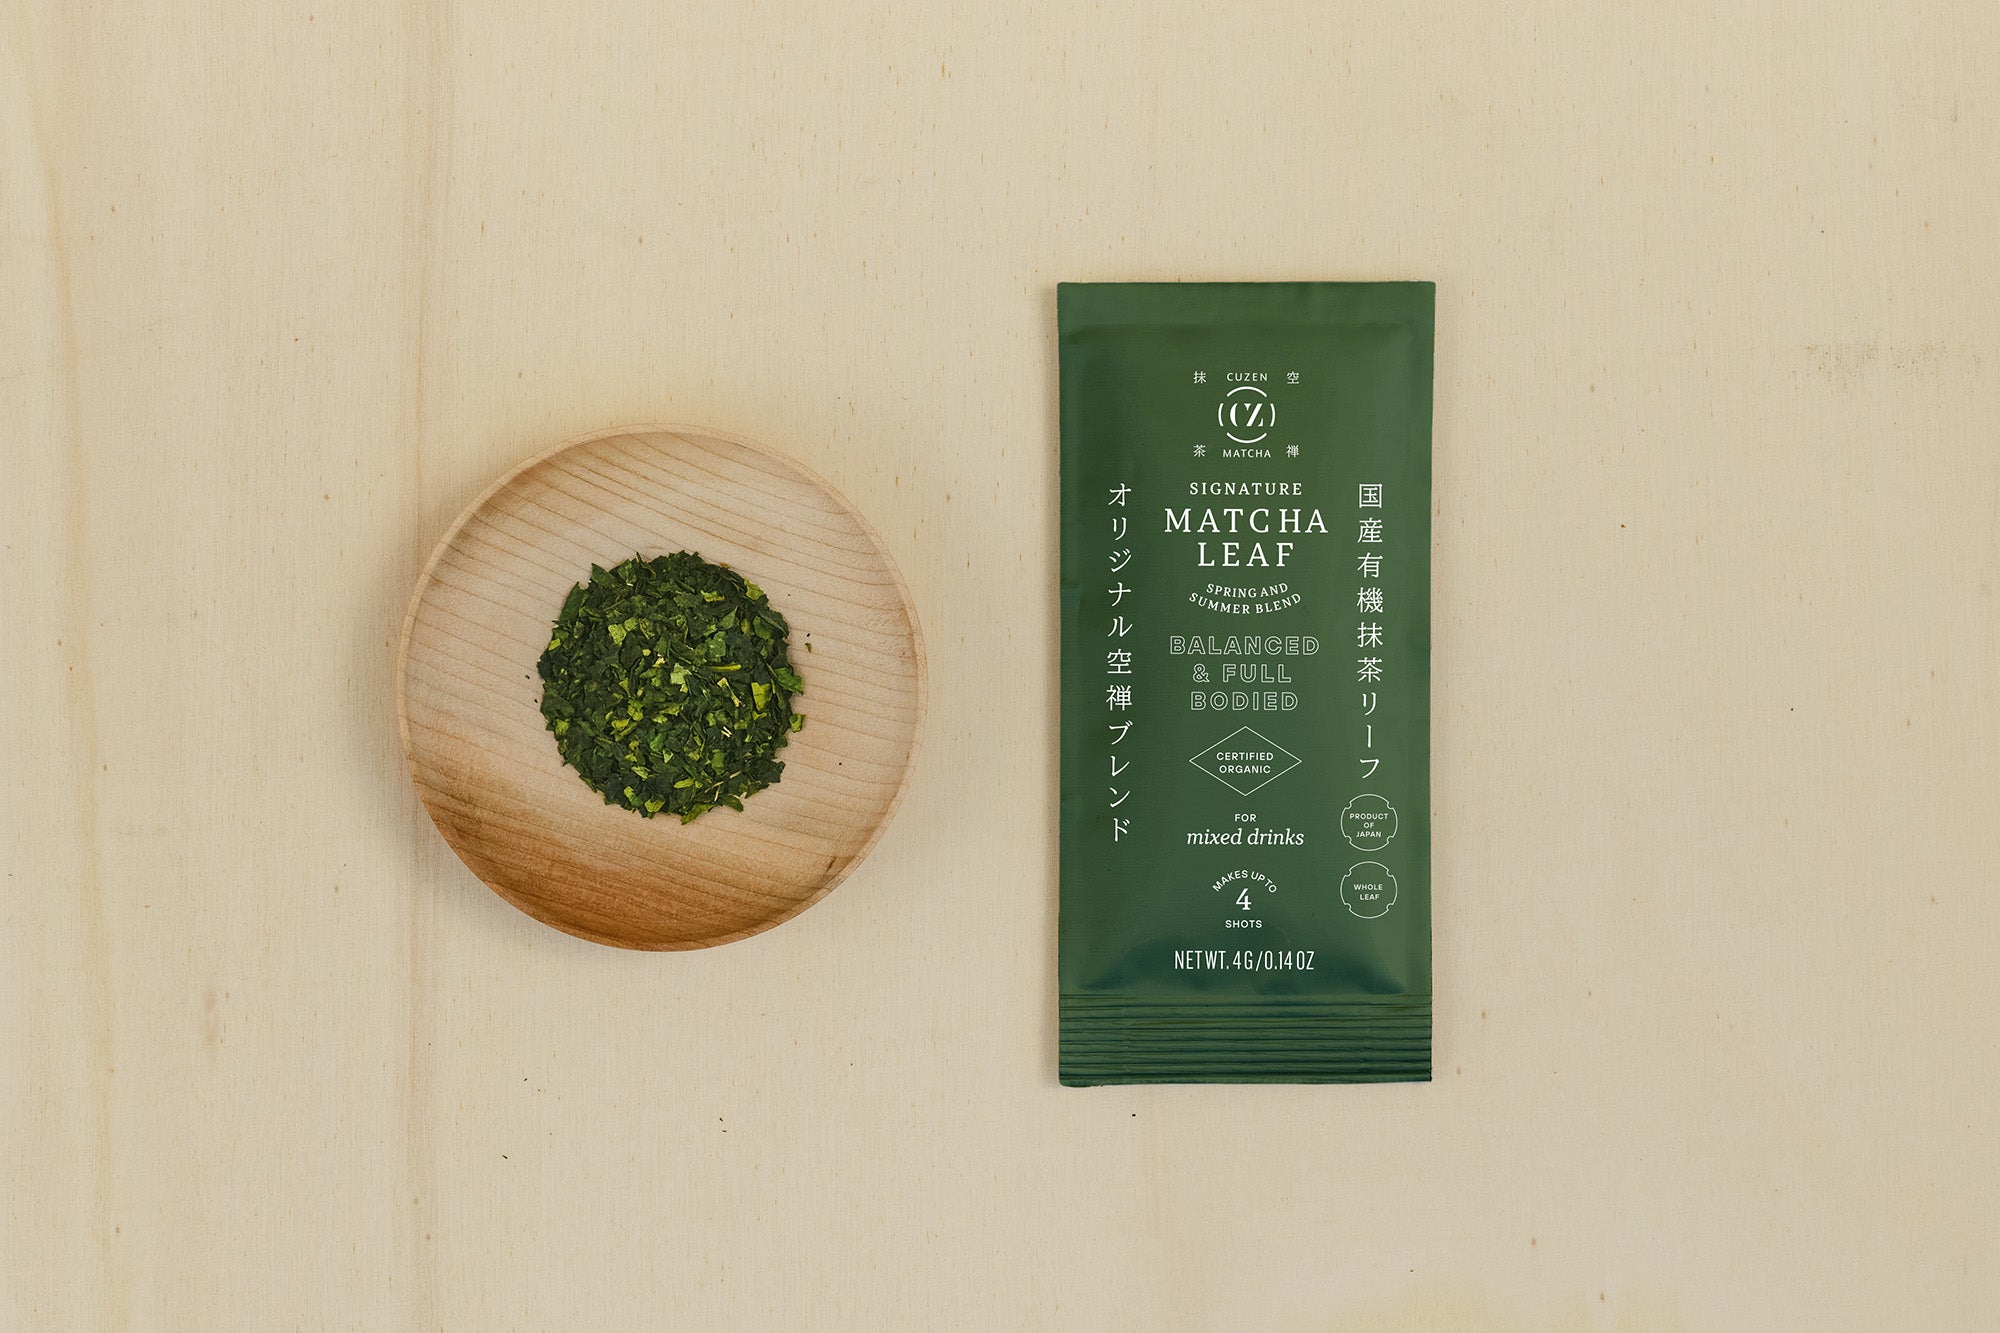 A 4-gram sample packet of Signature Blend Matcha next to a saucerful of deep green matcha leaves.